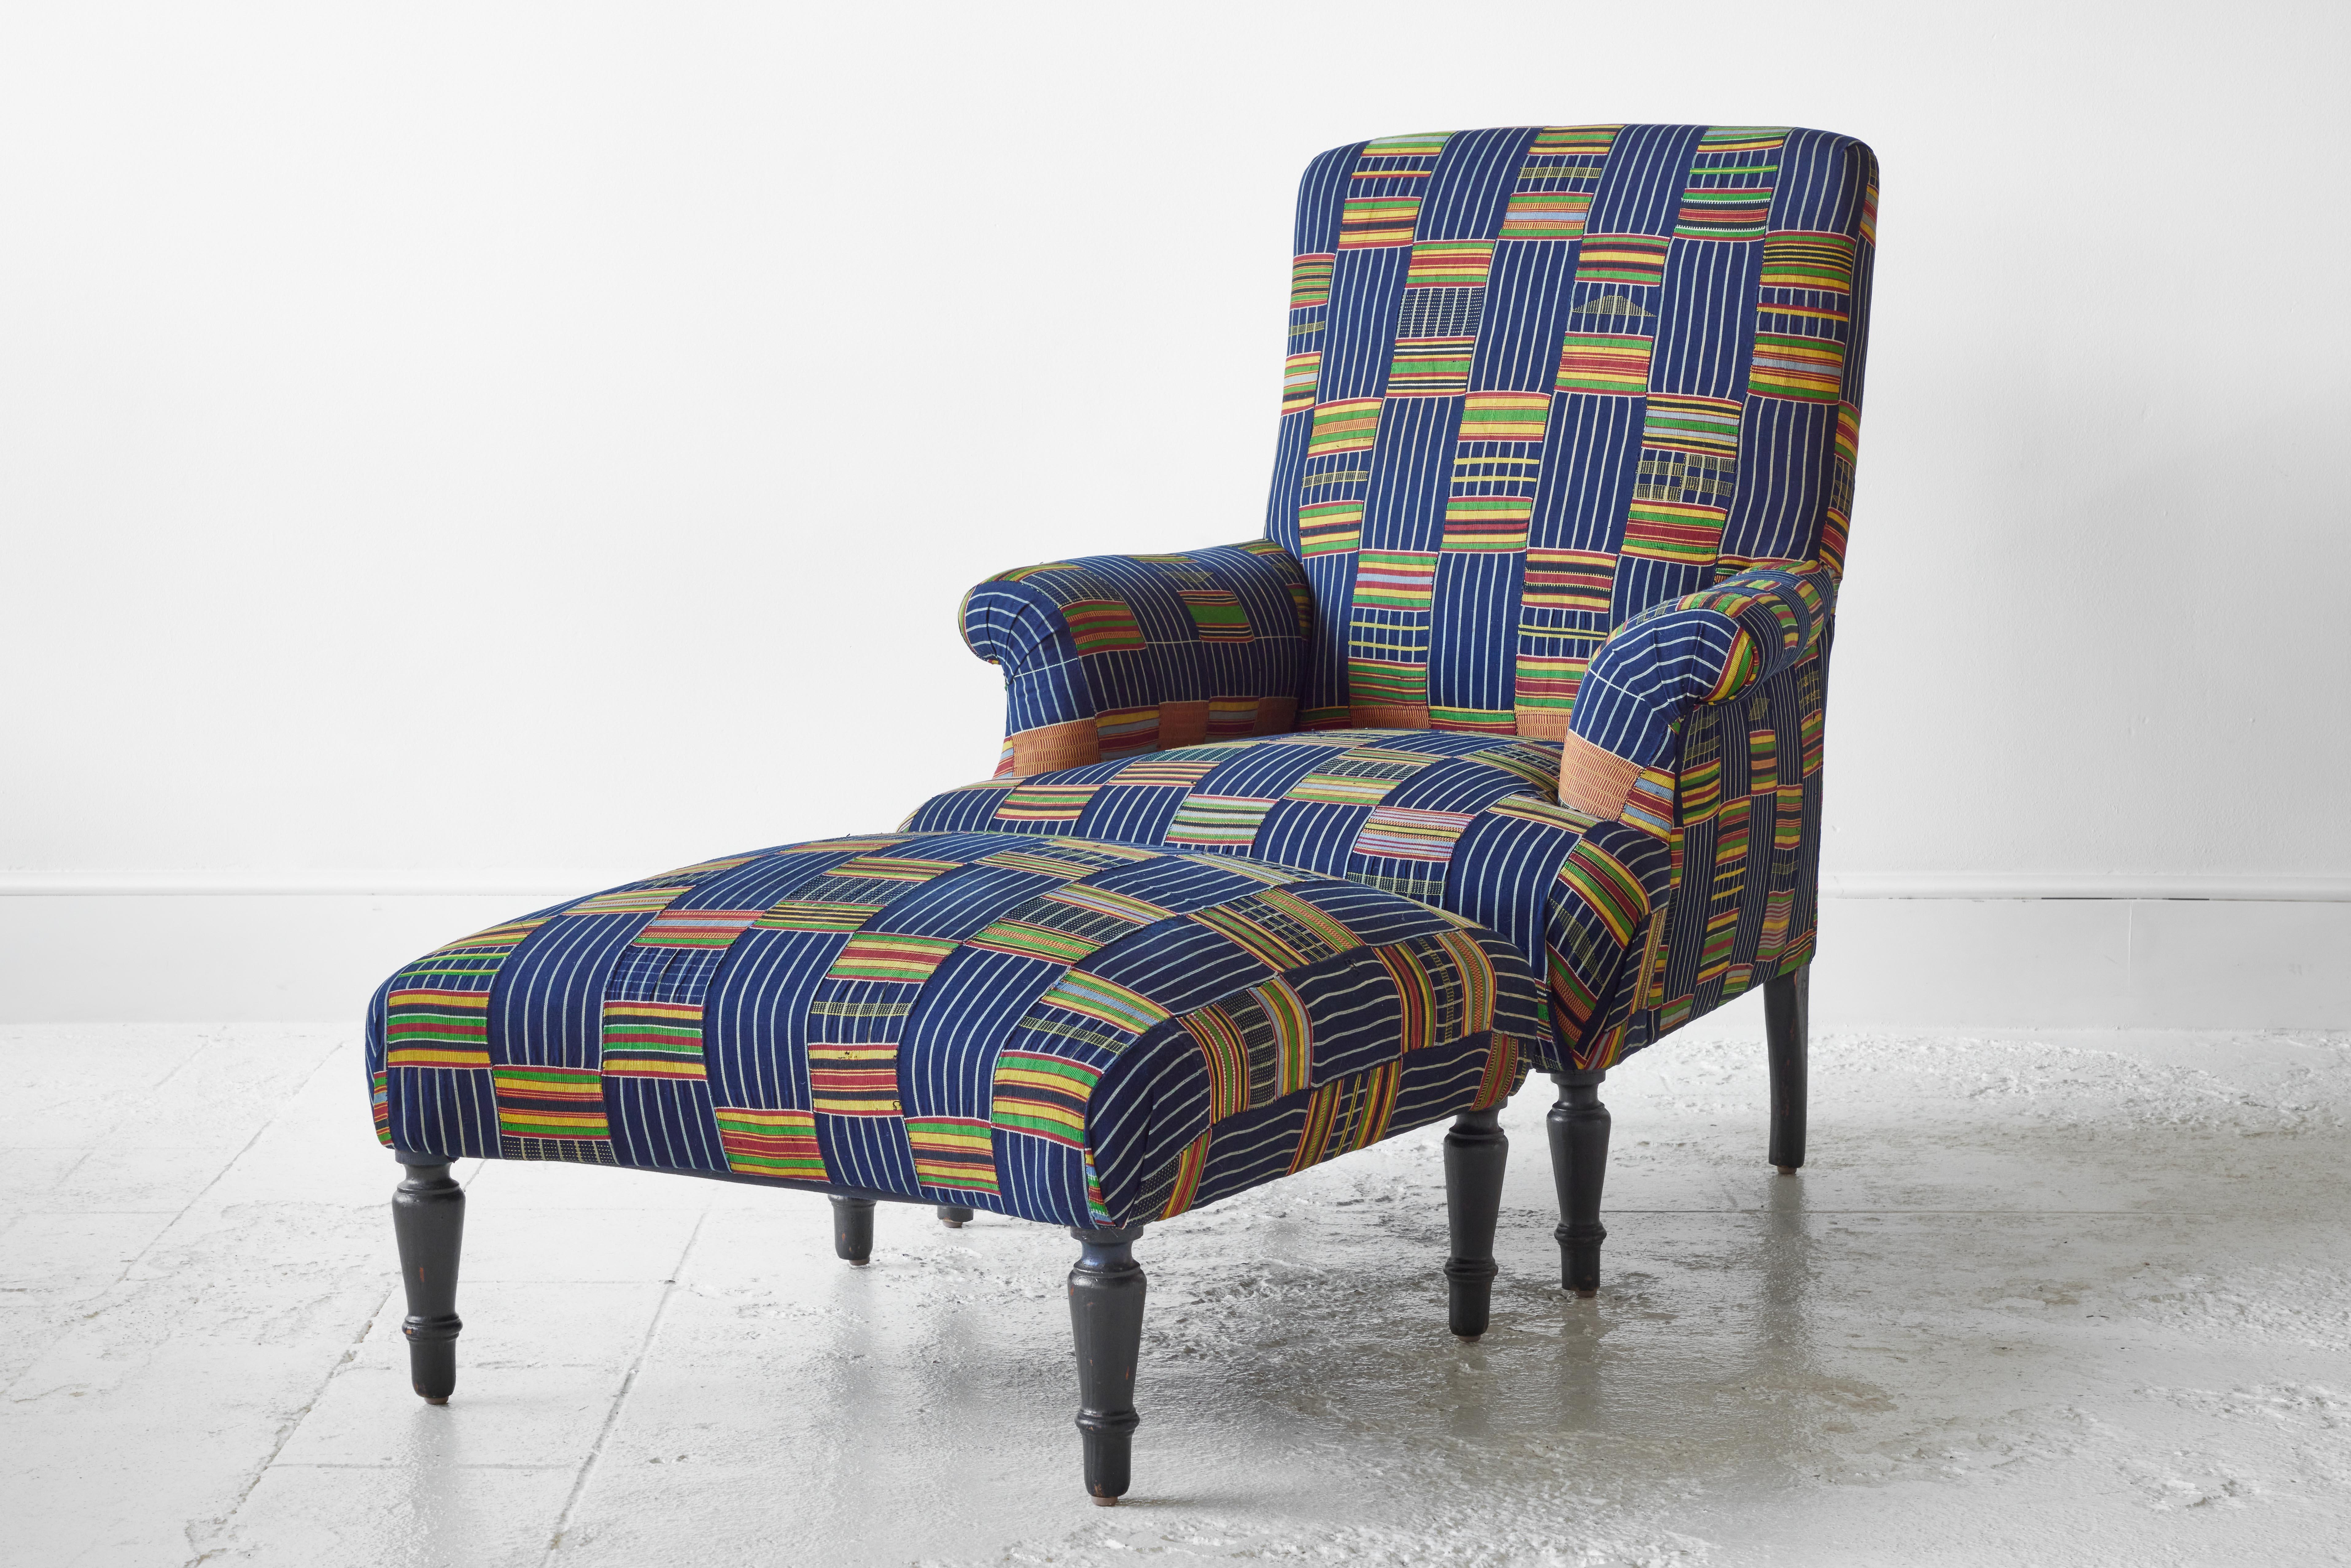 French armchair and ottoman newly upholstered in indigo African Ewe Fabric. The chair and ottoman combination is a beautiful and textural assortment of Classic shapes and color.

Chair measures: 26